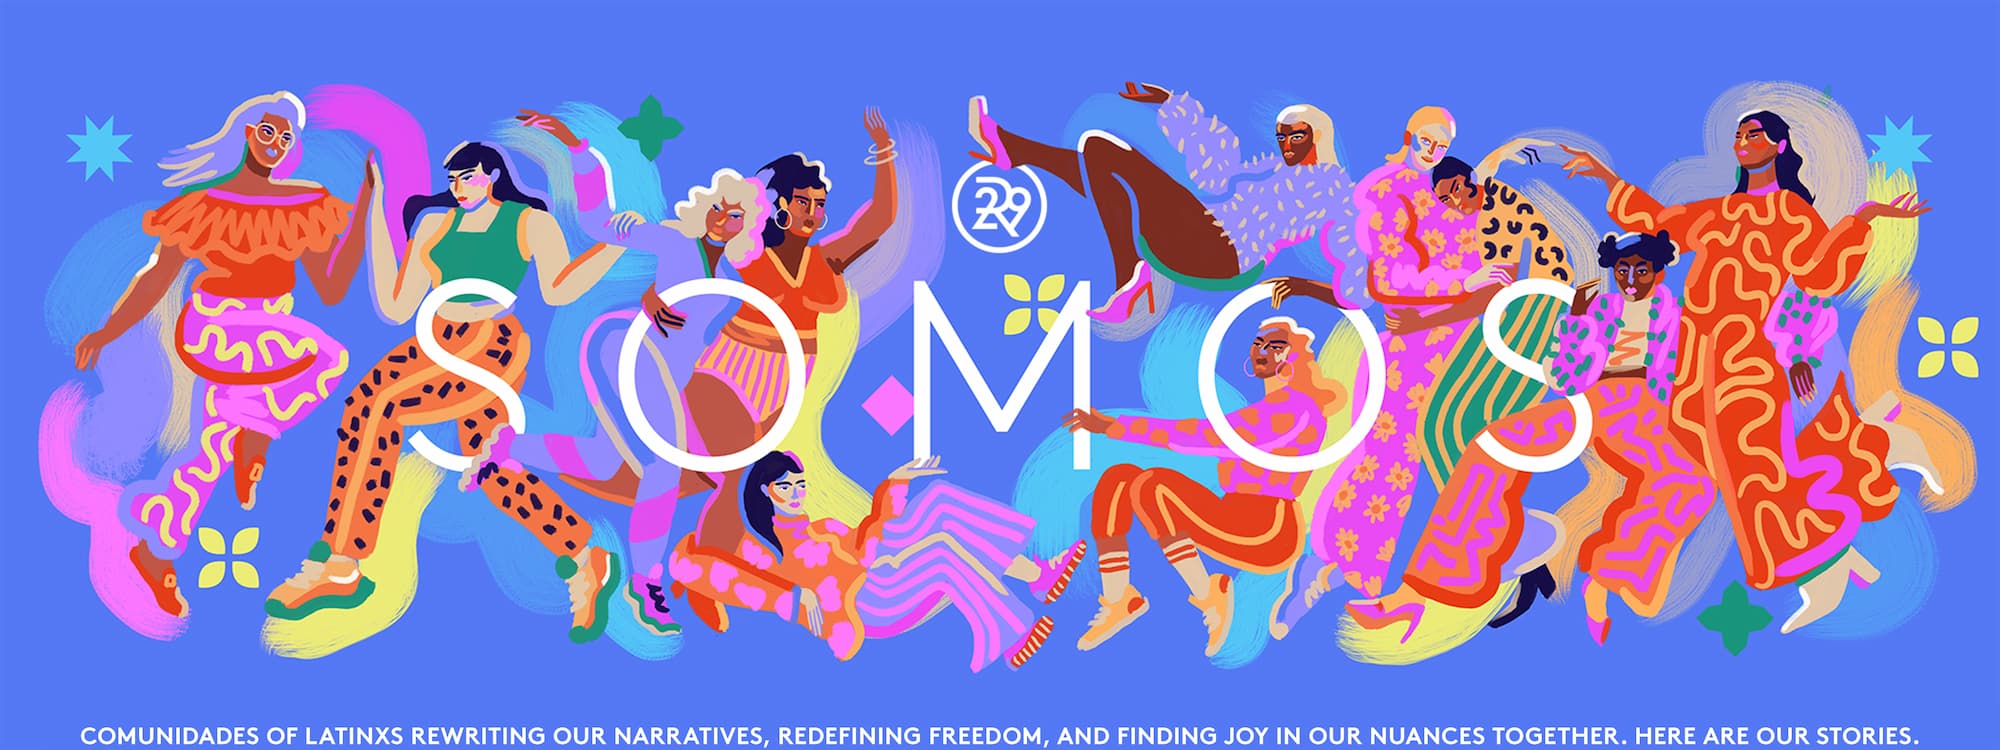 Comunidades of Latinxs rewriting our narratives, redefining freedom, and finding joy in our nuances together. Here are our stories.